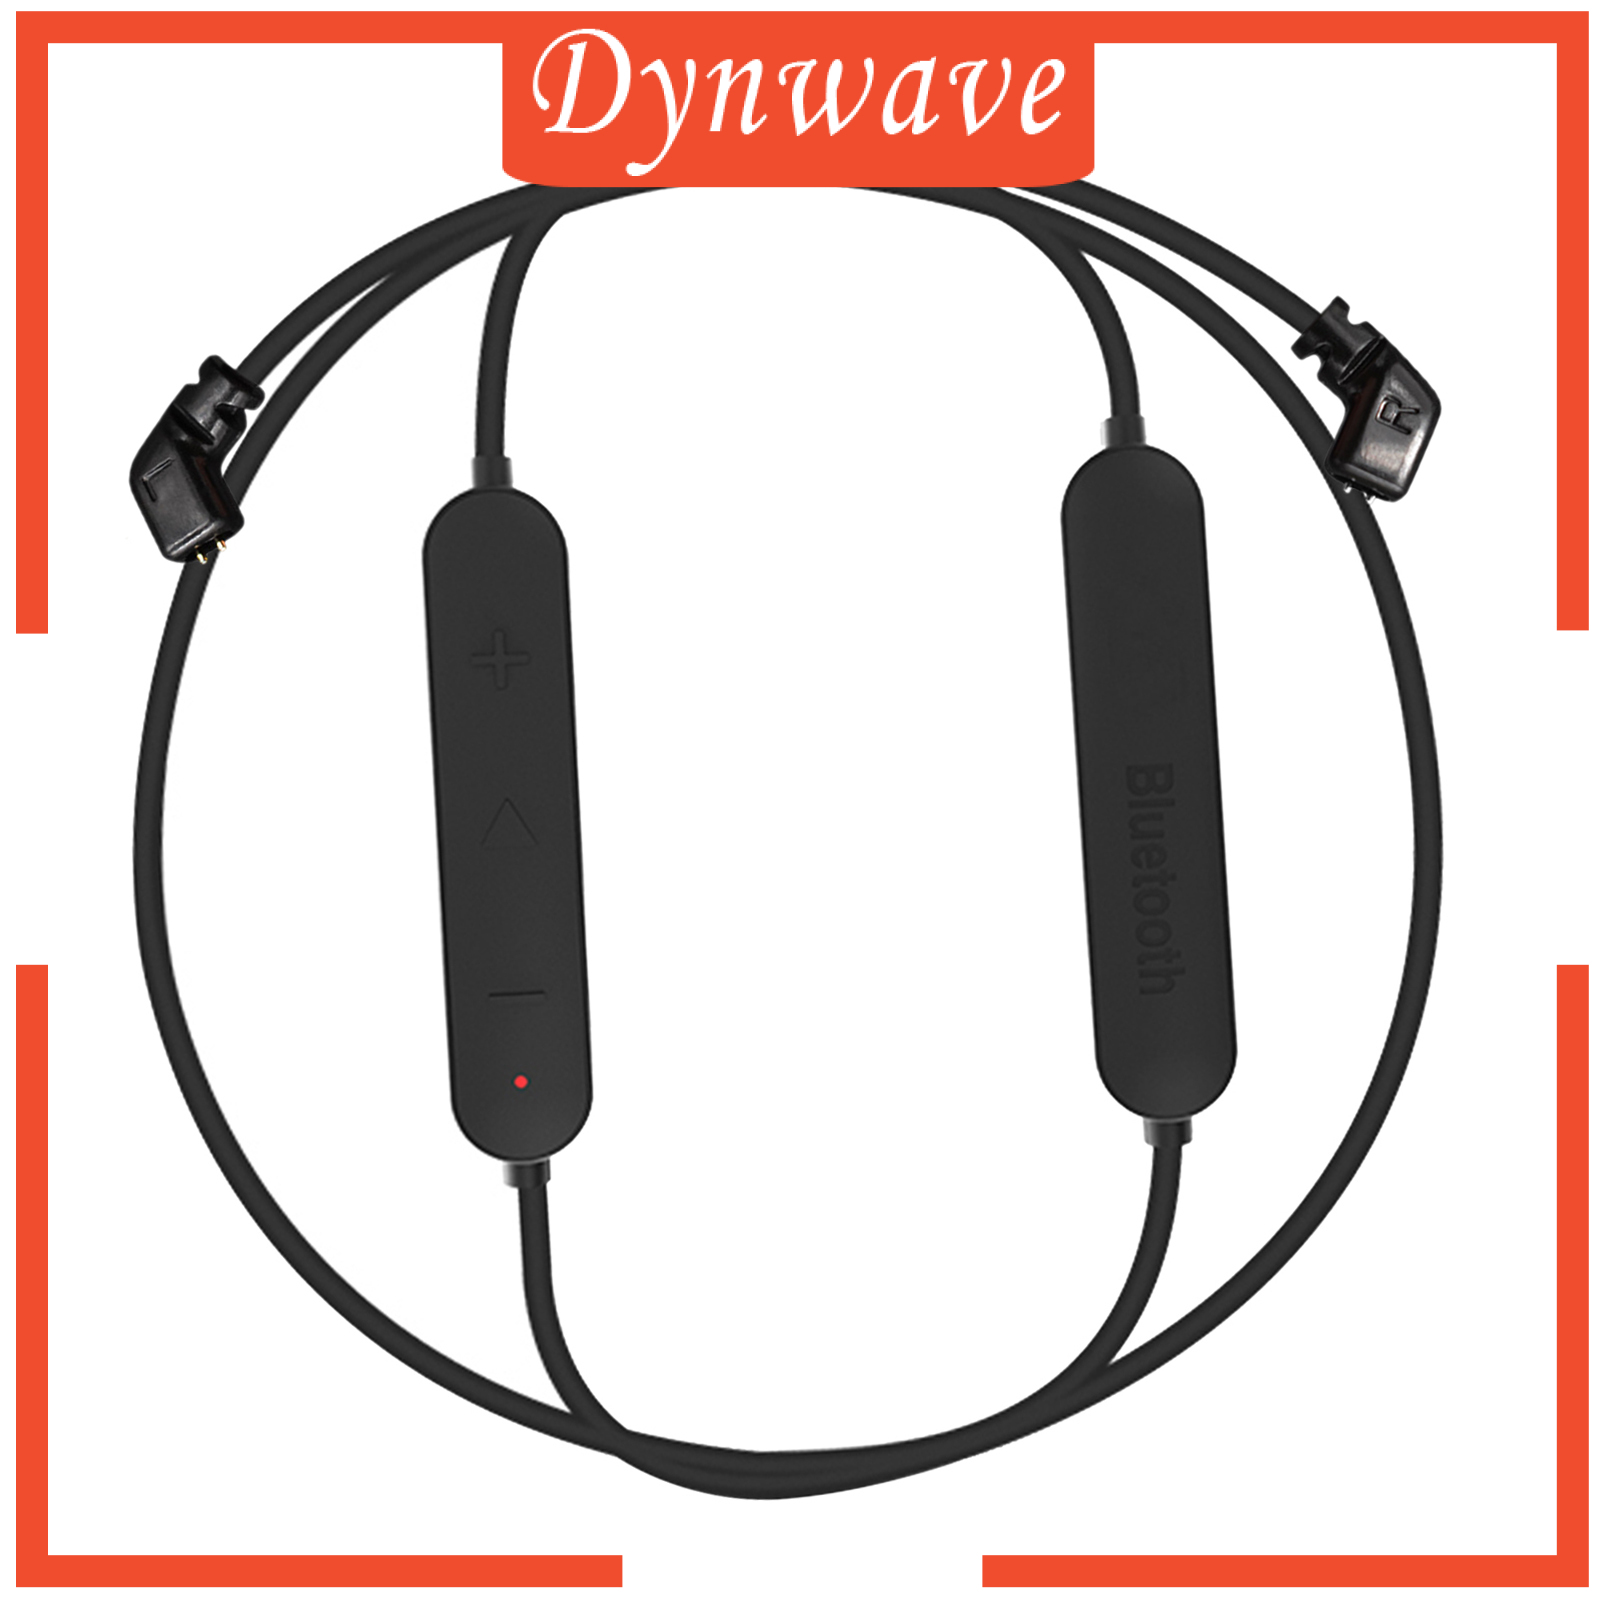 [DYNWAVE]Bluetooth Module Wireless Upgrade Cable Replacement for KZ Earphones, HD Transmission